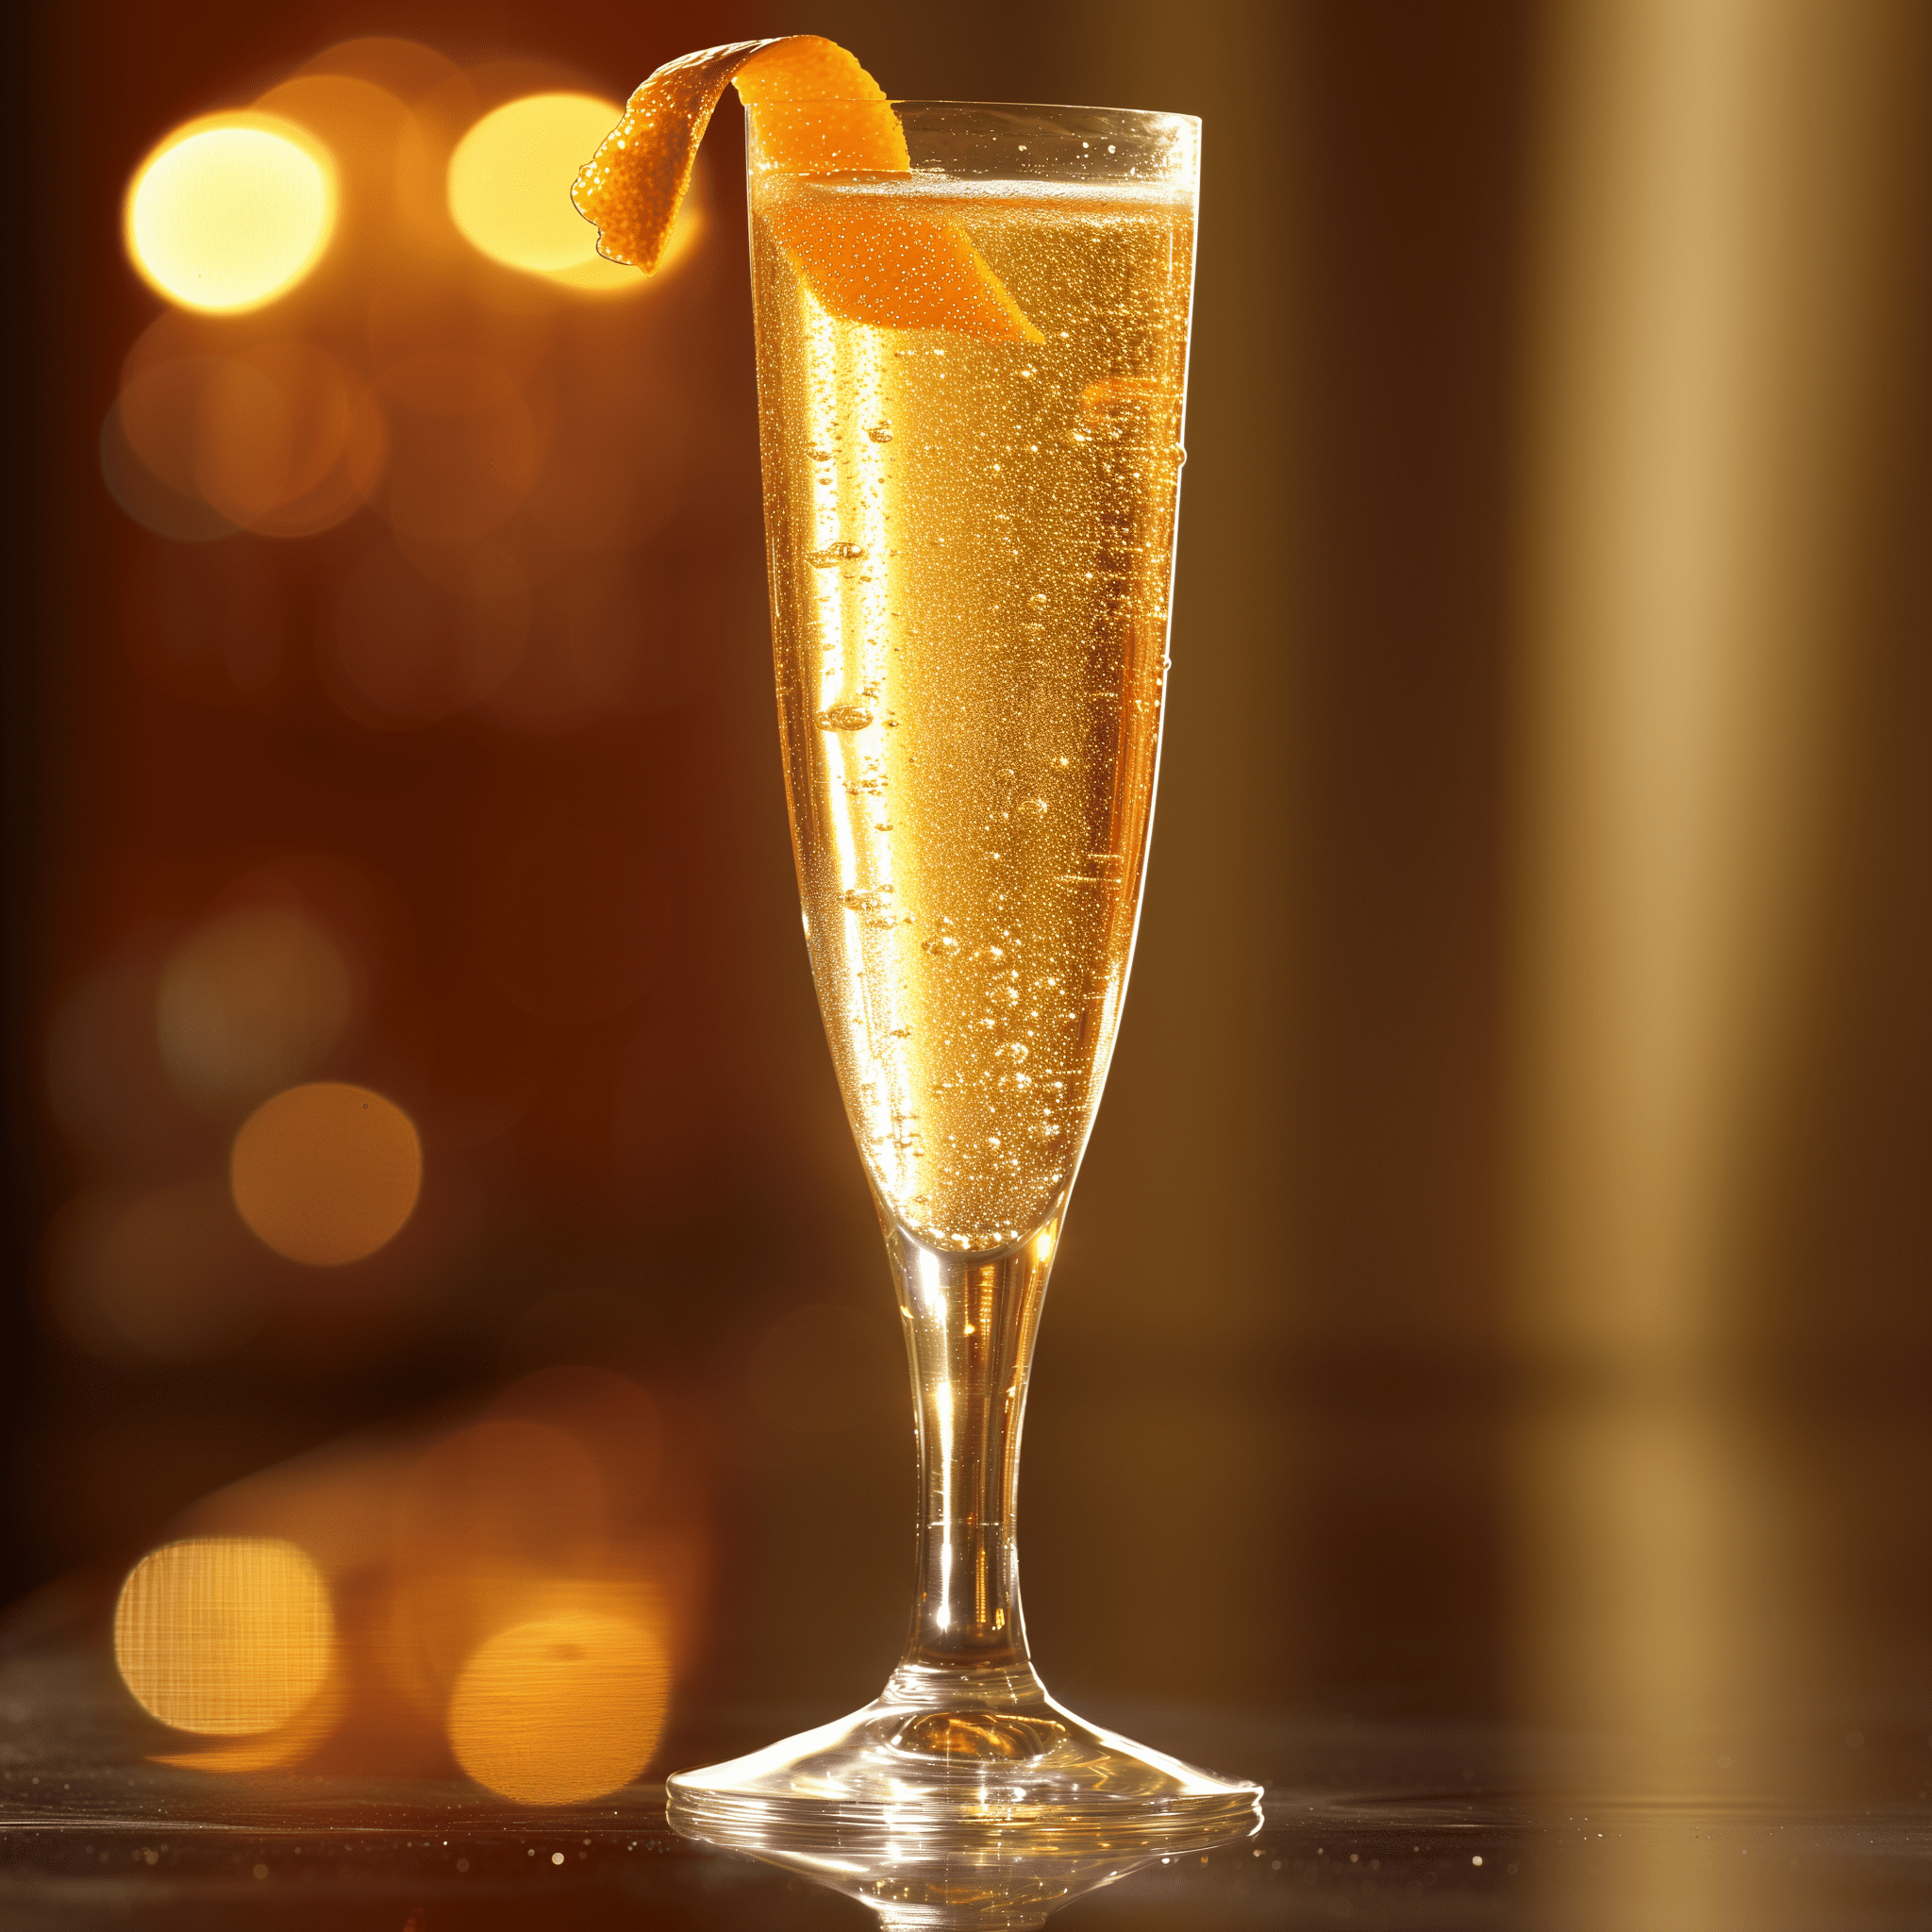 Puccini Cocktail Recipe - The Puccini cocktail offers a delightful balance of sweetness and acidity, with the fresh mandarin juice providing a vibrant citrus flavor that complements the crisp, bubbly prosecco. It's light, refreshing, and has a subtle effervescence that tickles the palate.